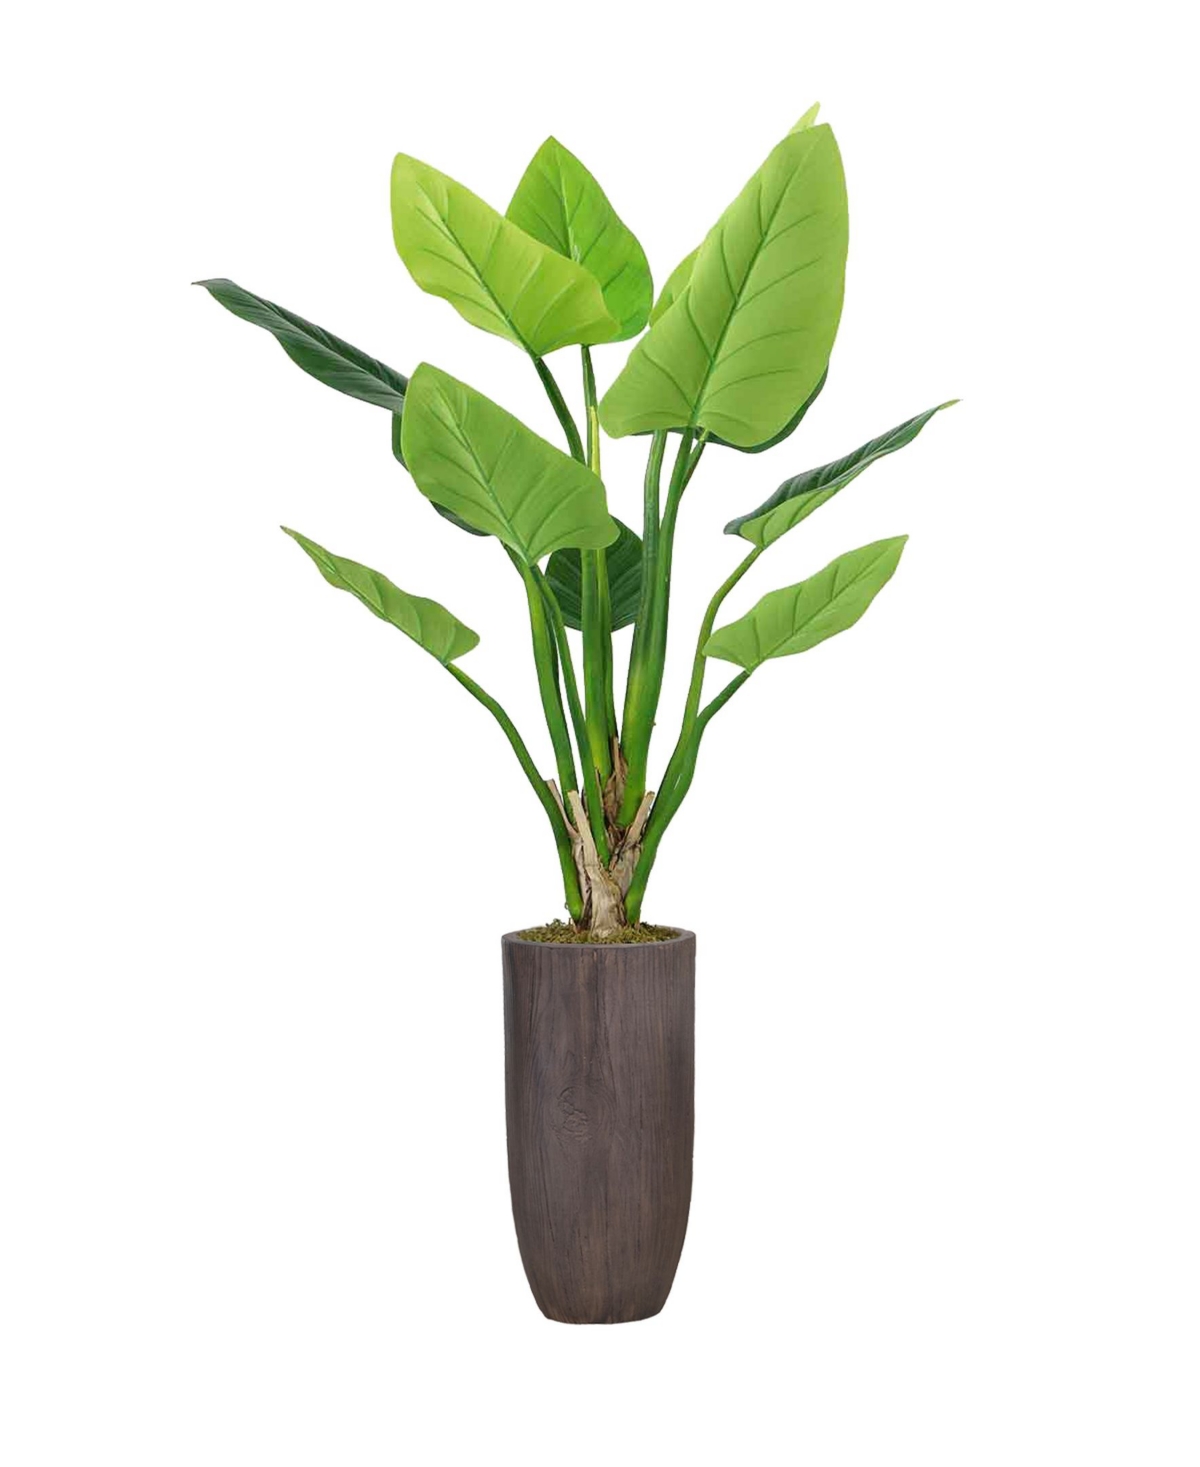 62.25" Philodendron Erubescens Green Emerald in Resin Planter - Green